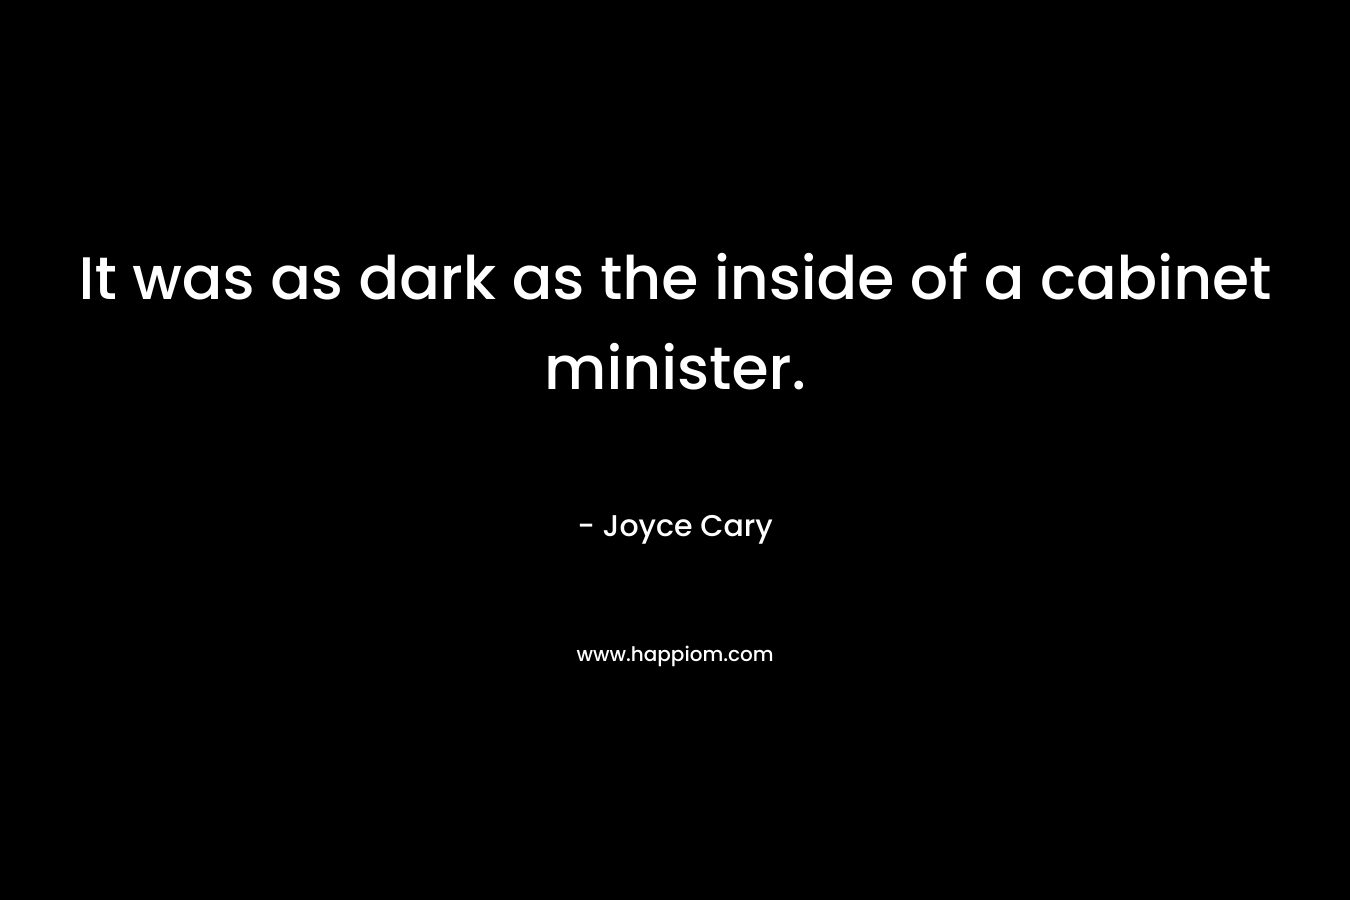 It was as dark as the inside of a cabinet minister. – Joyce Cary